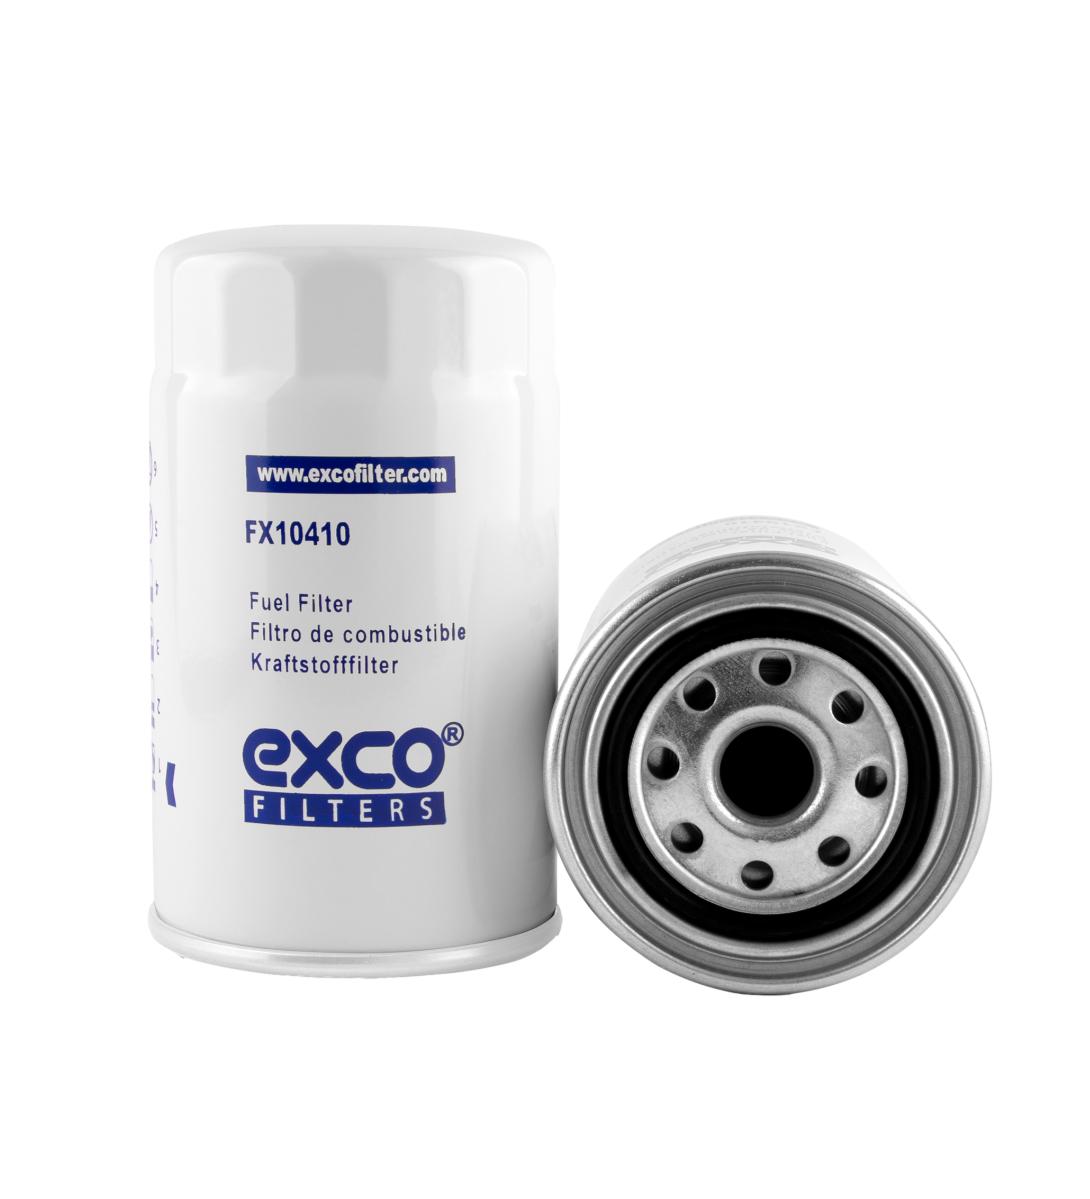 
                        
                                                                                                                FIAAM FP4641 FUEL FILTER CROSS REFERENCE
                                                                            
                            